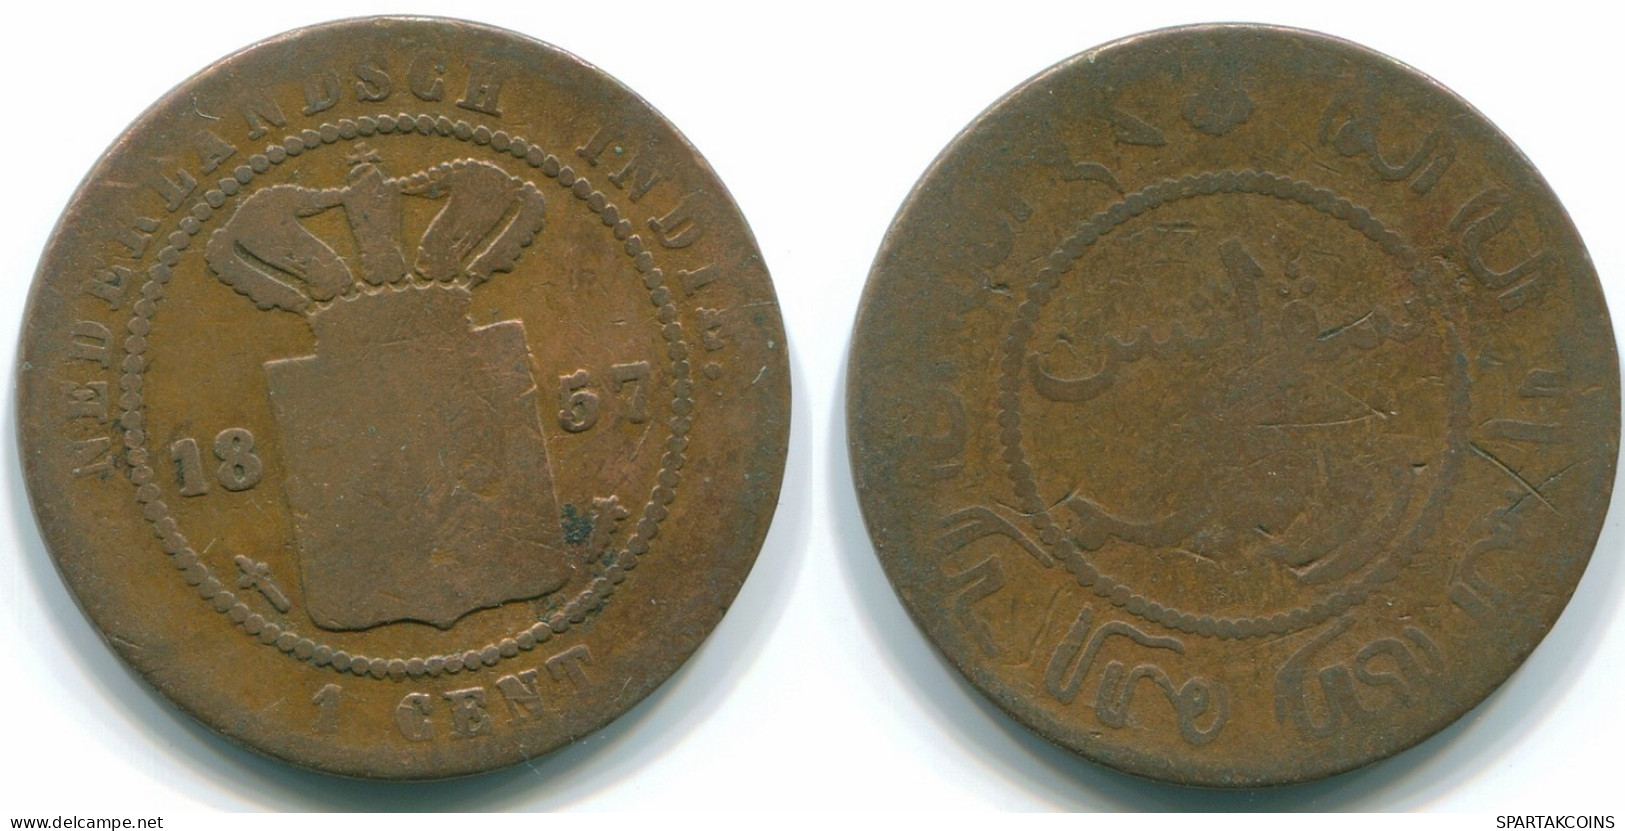 1 CENT 1857 NETHERLANDS EAST INDIES INDONESIA Copper Colonial Coin #S10037.U.A - Indes Néerlandaises